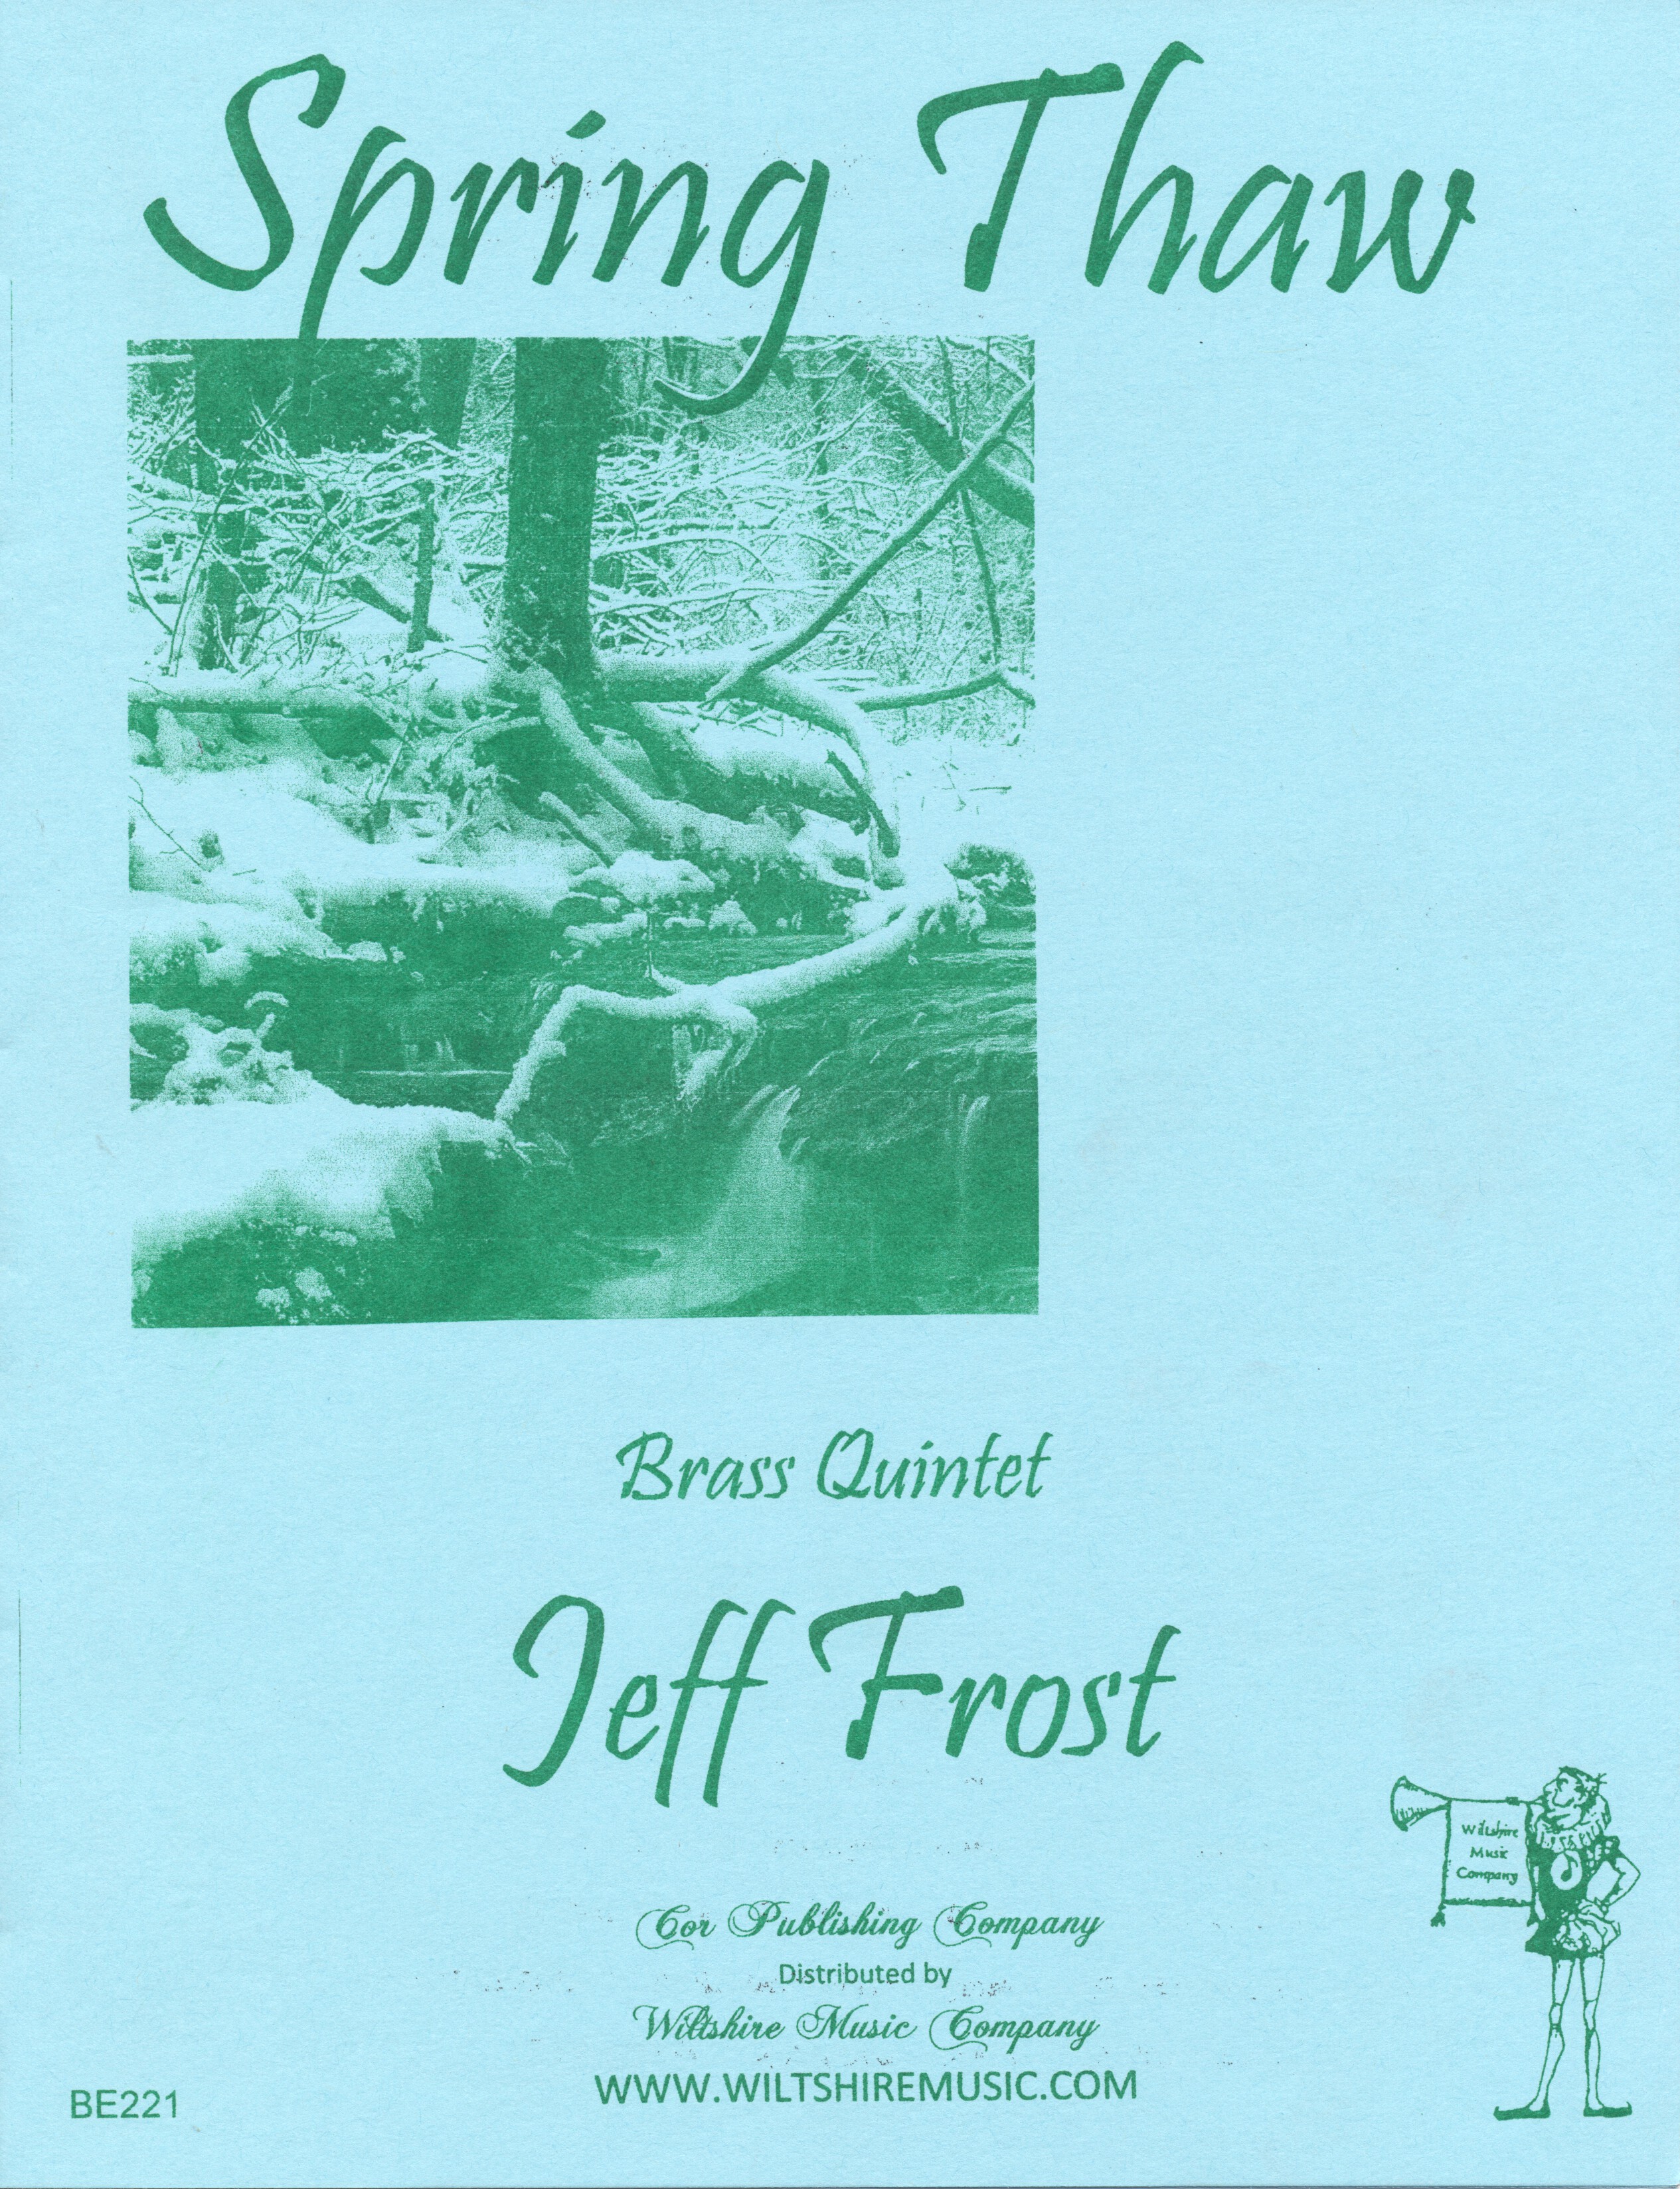 Spring Thaw, Jeff Frost